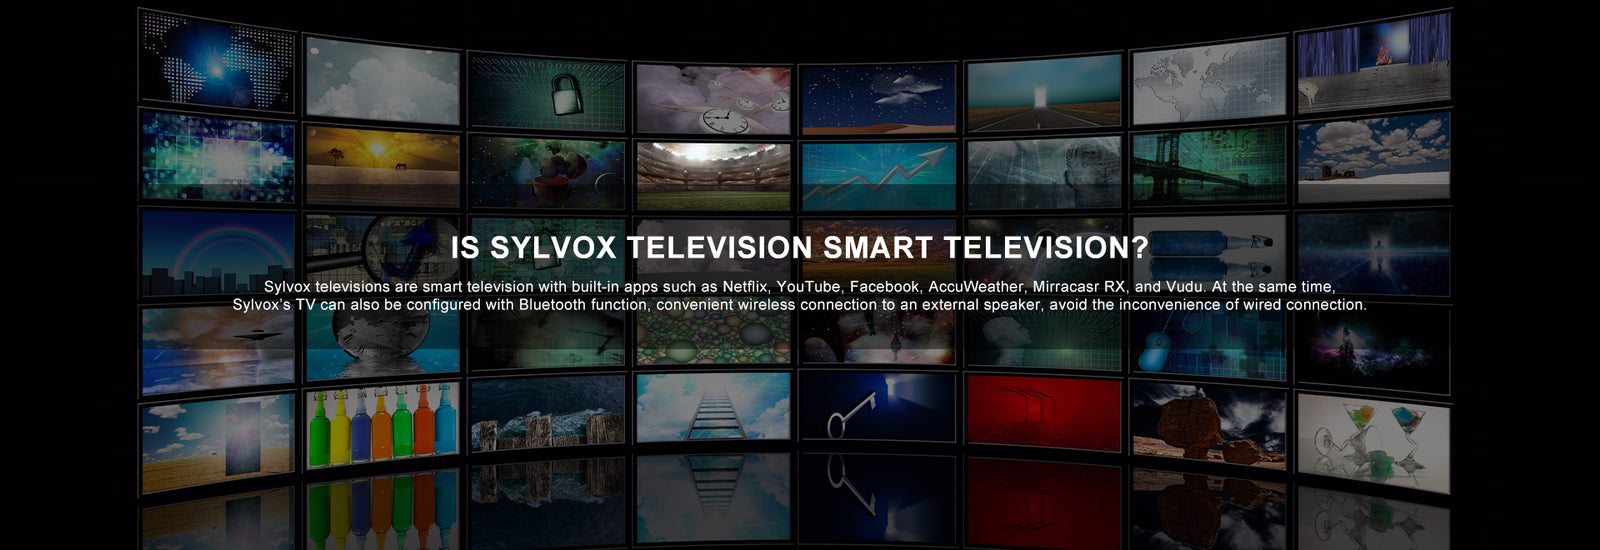 about_sylvox_outdoor_tv